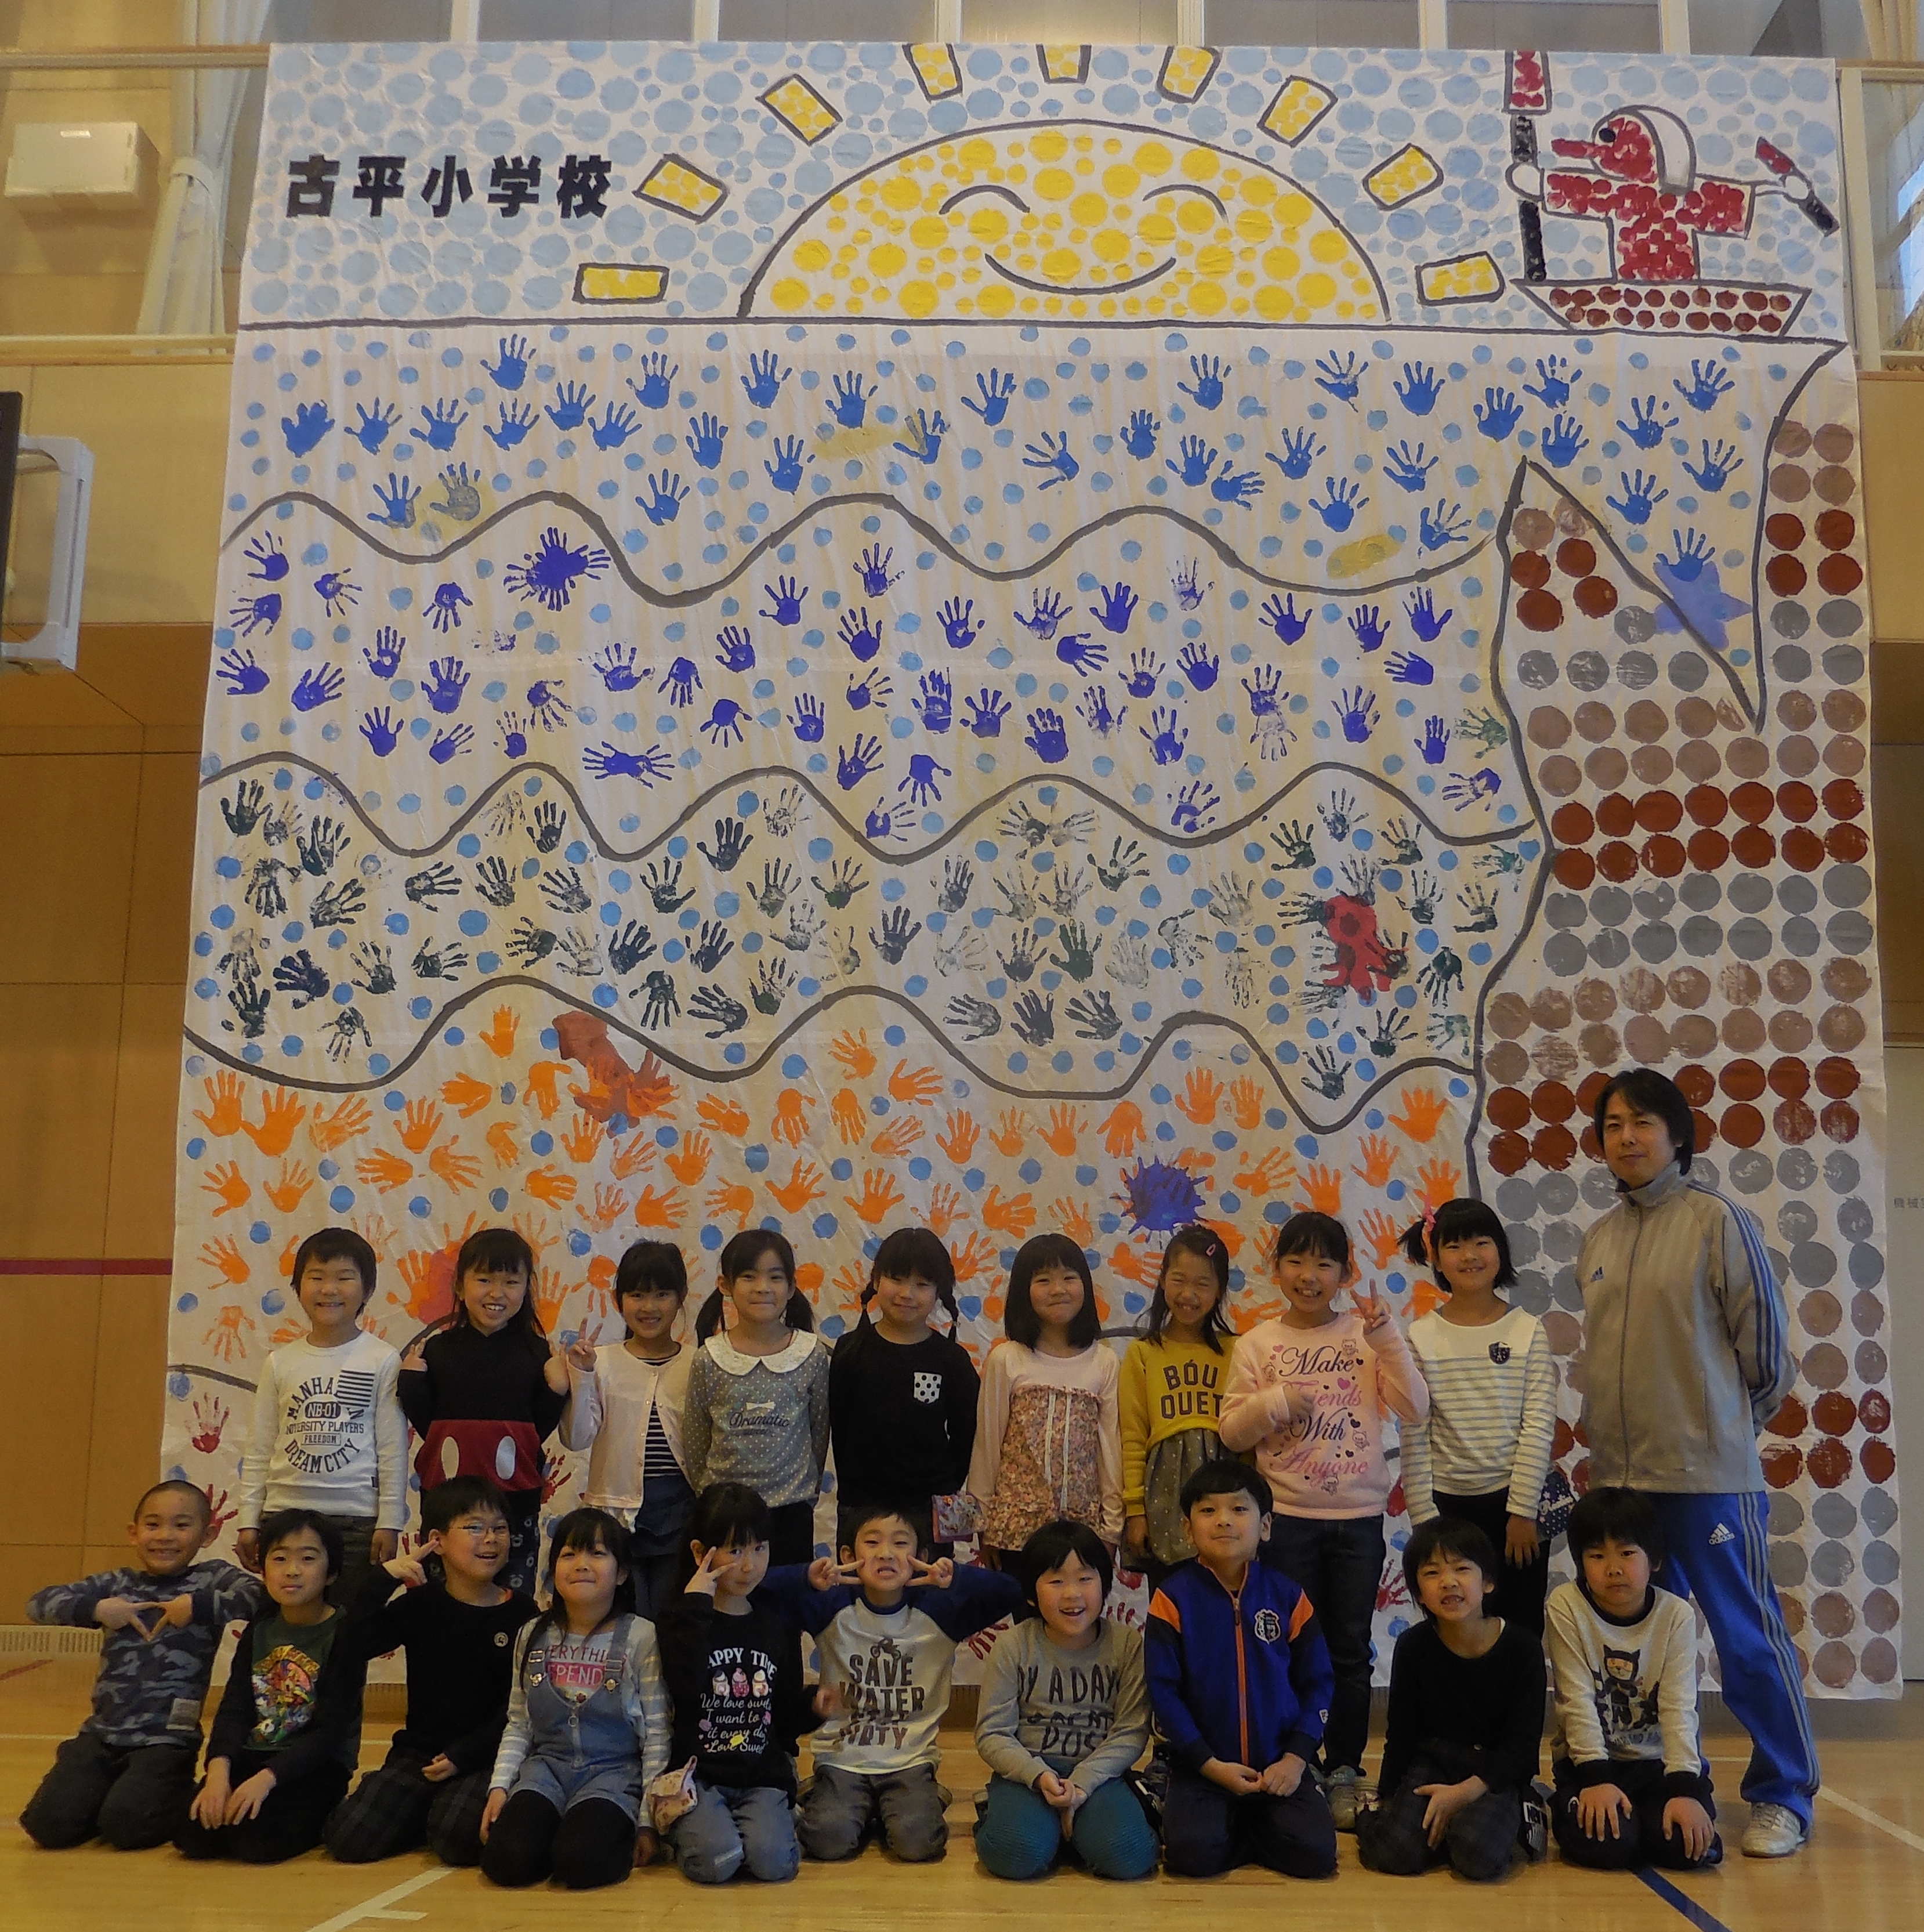 The Biggest Painting in the World 2020 Furubira town was completed